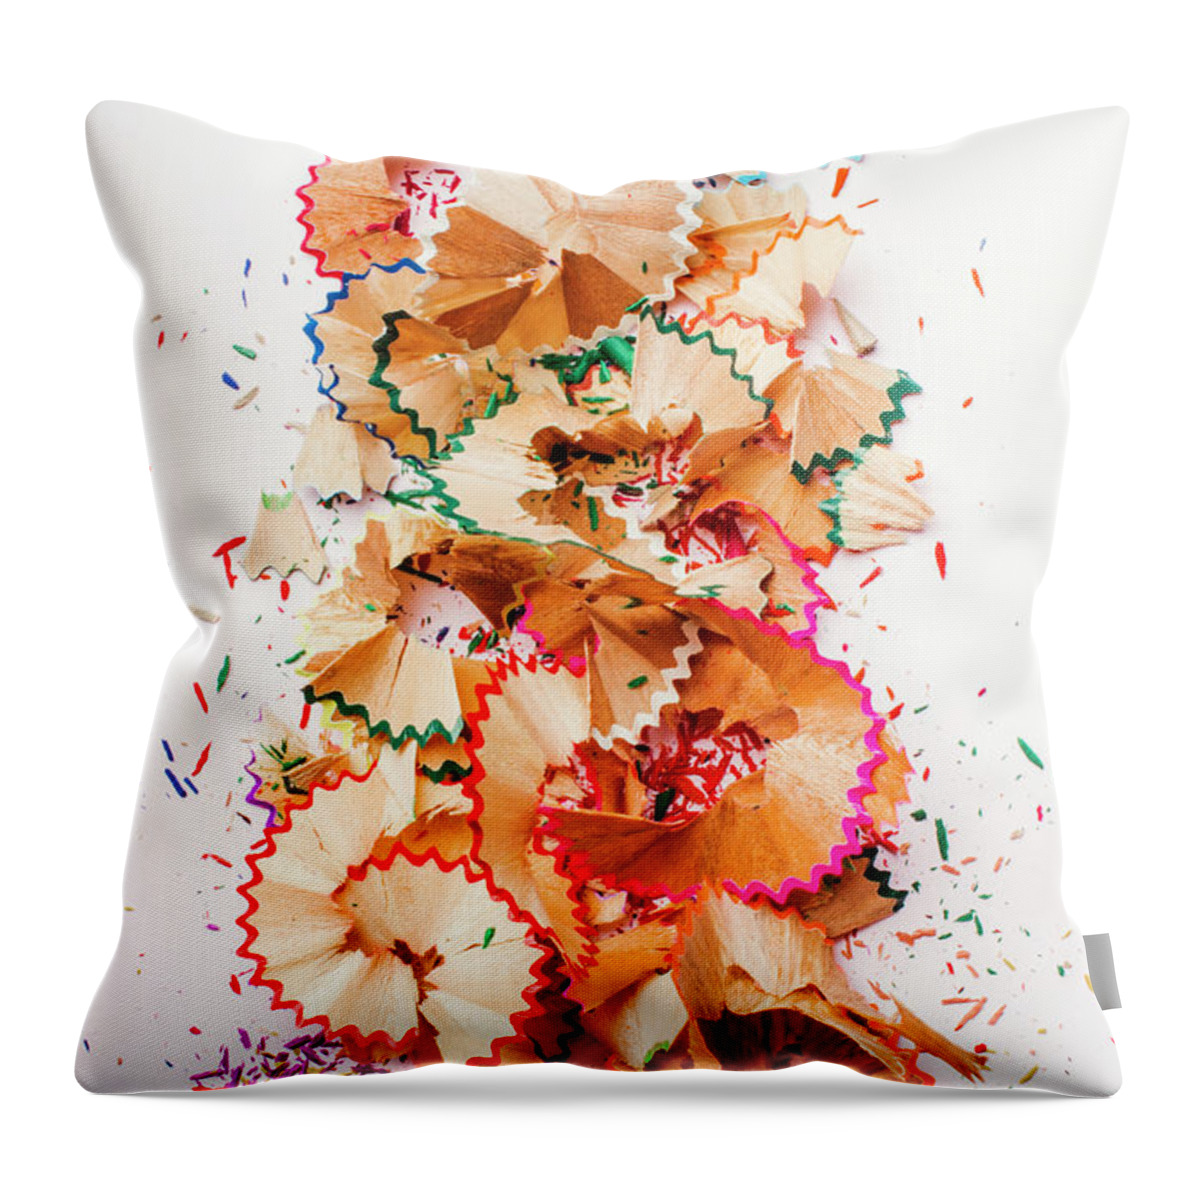 School Throw Pillow featuring the photograph Creative mess by Jorgo Photography